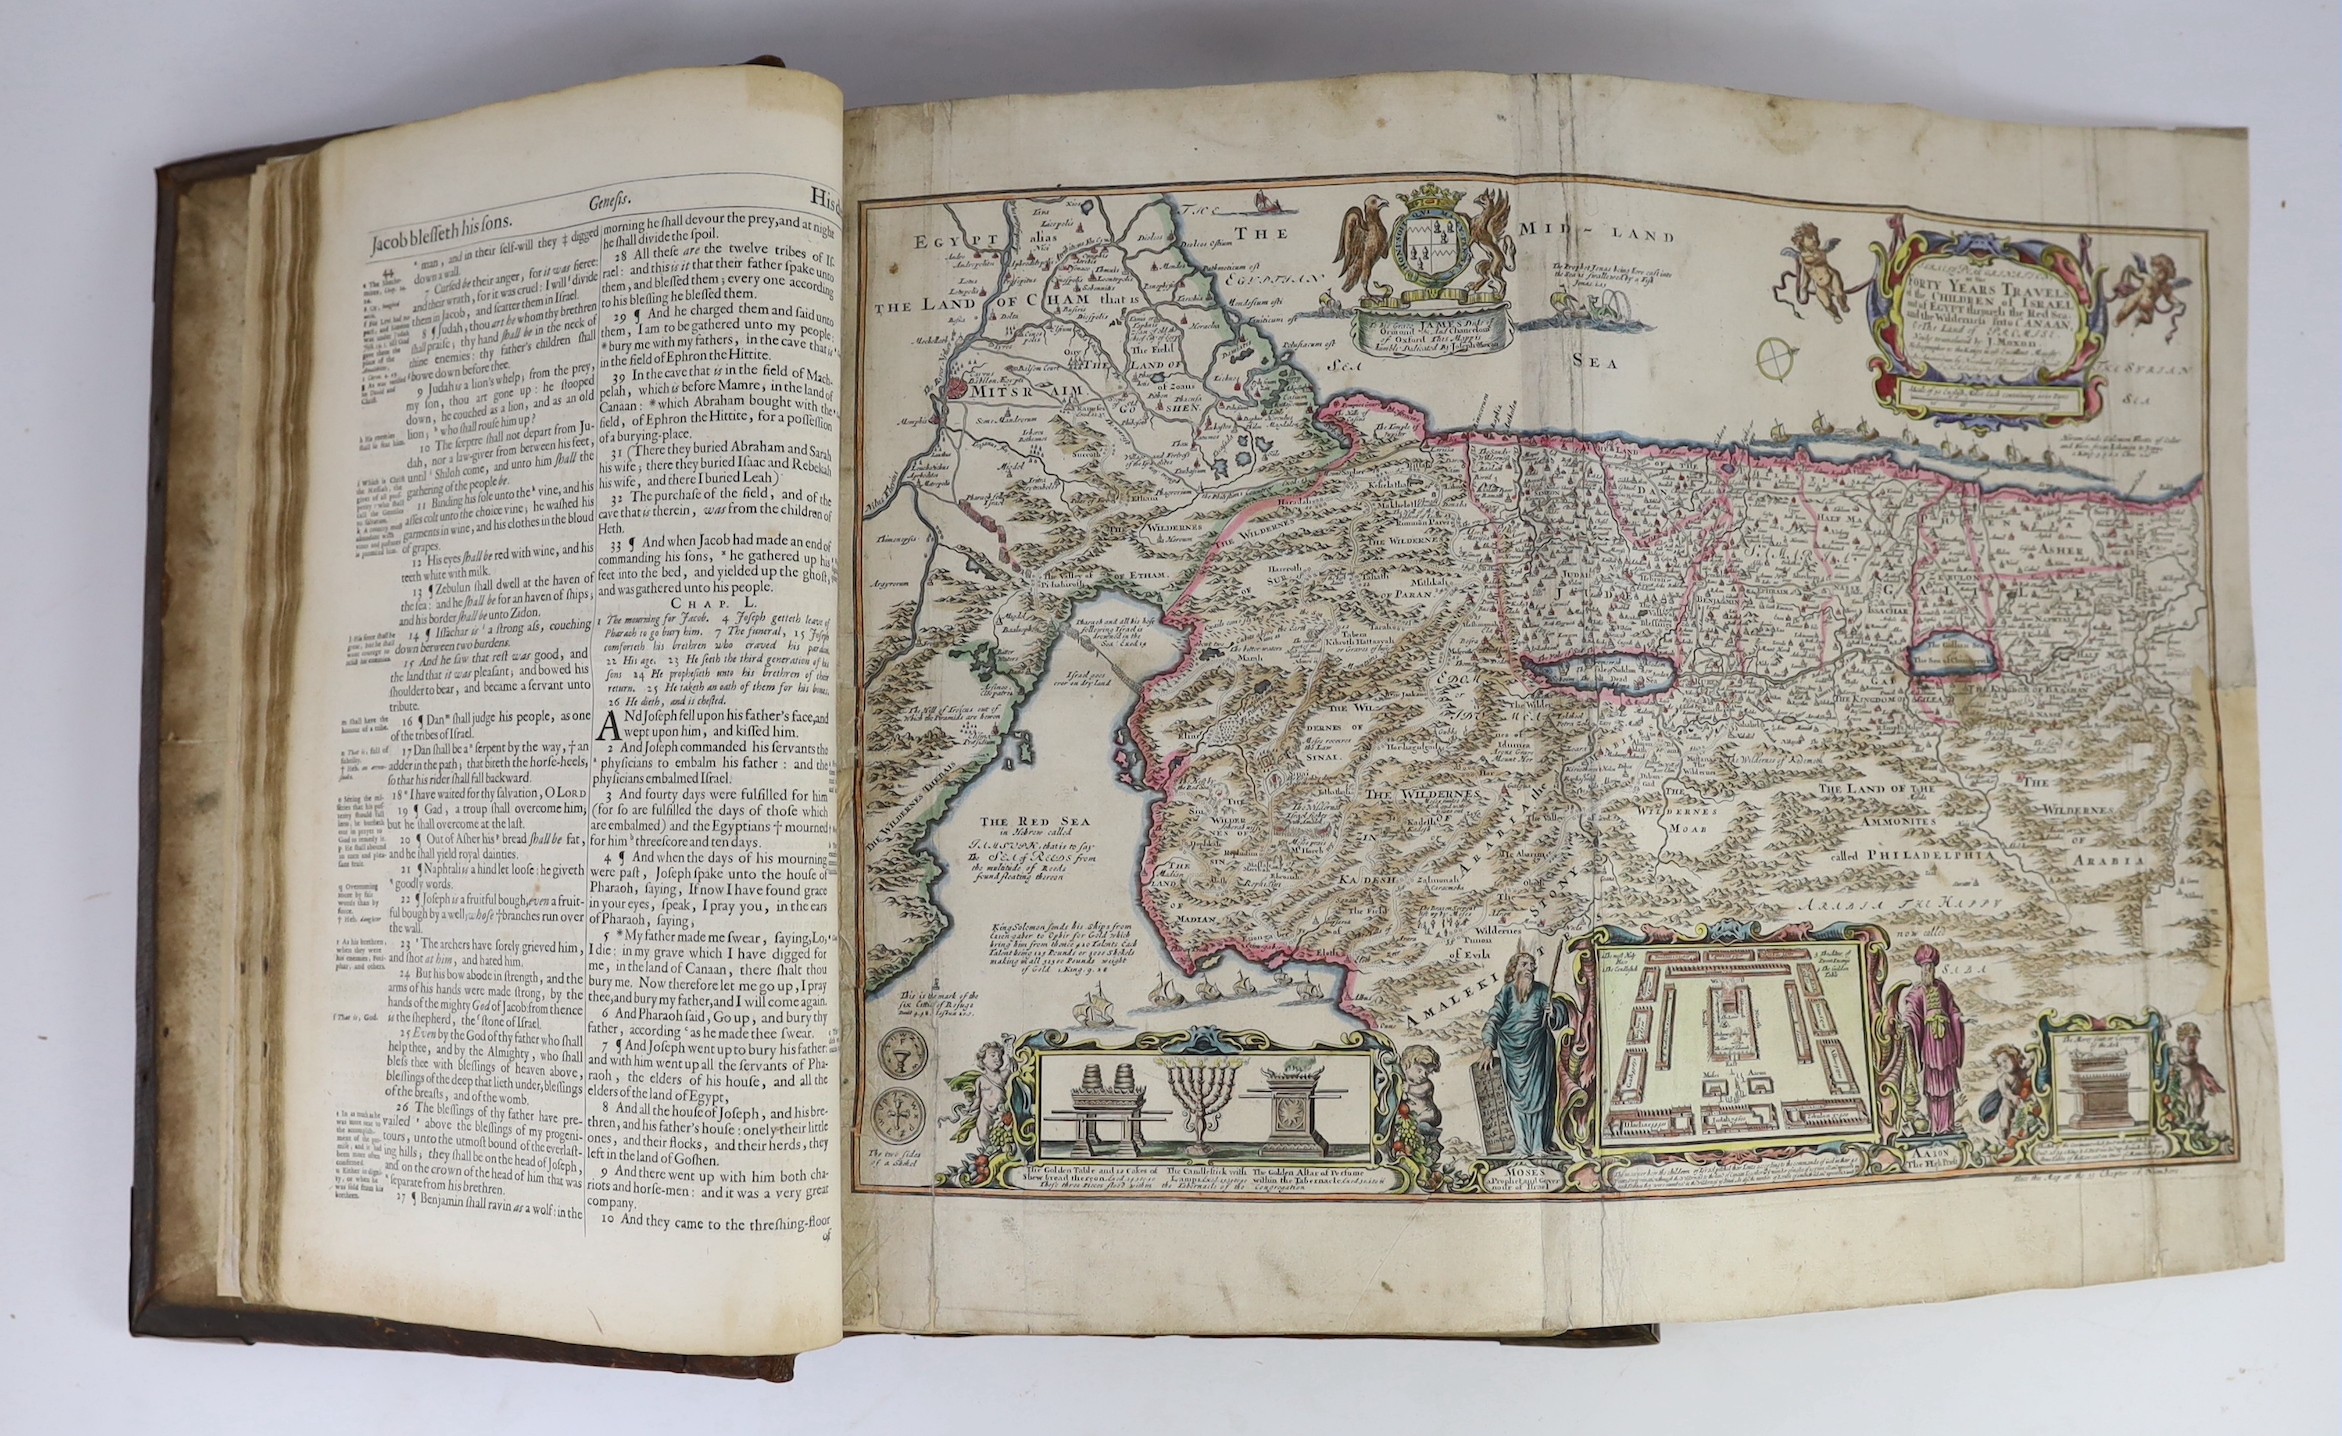 (Amsterdam - Printed 18th Century Folio Bible - Authorised Version, with Geneva Notes) The Holy Bible Containing the Old Testament and the New.......With most profitable Annotations....hand-coloured pictorial engraved an